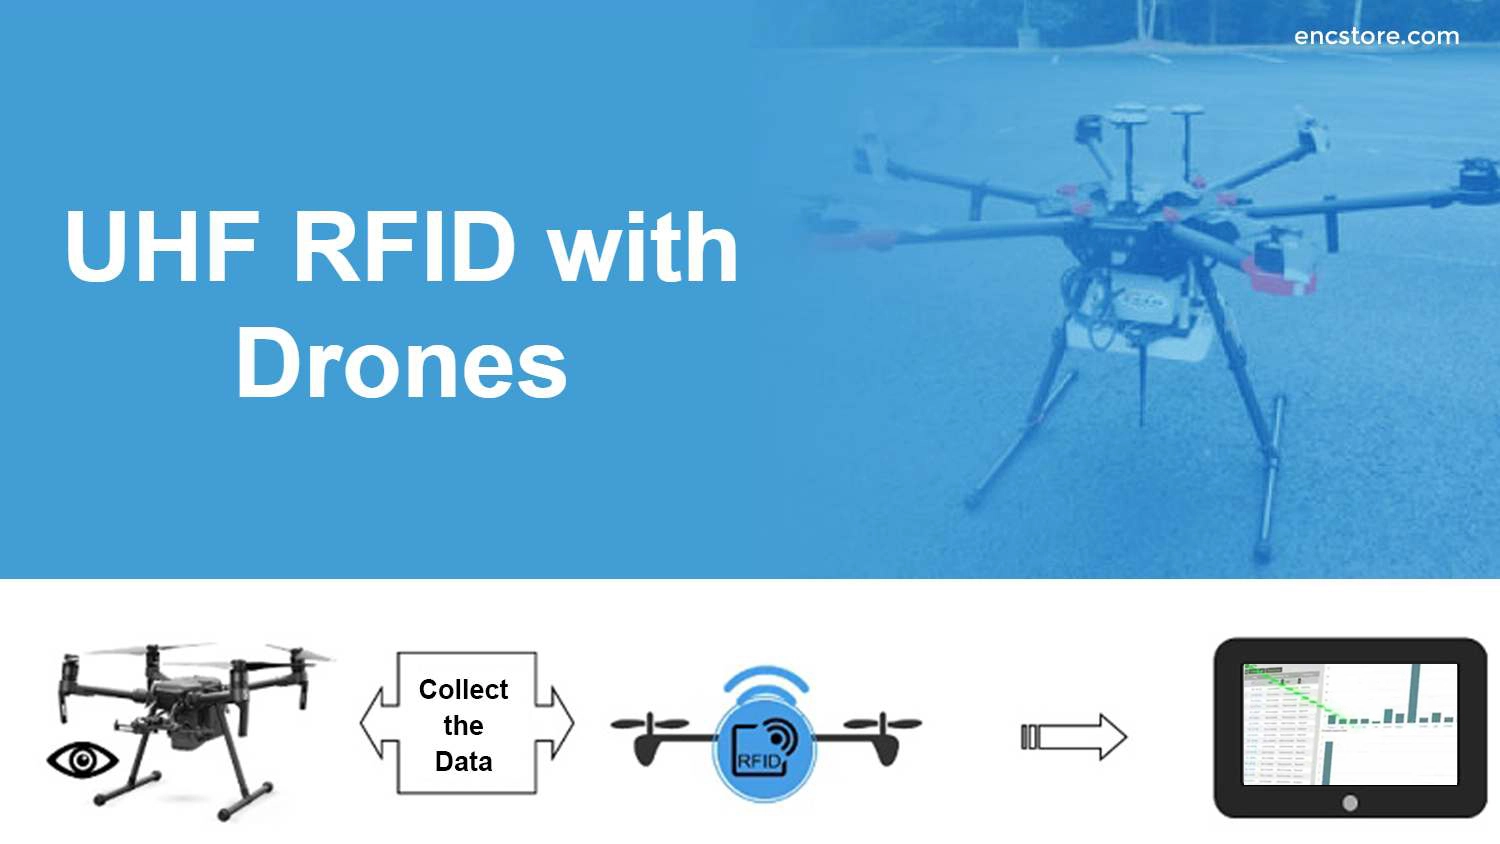 UHF RFID with Drones